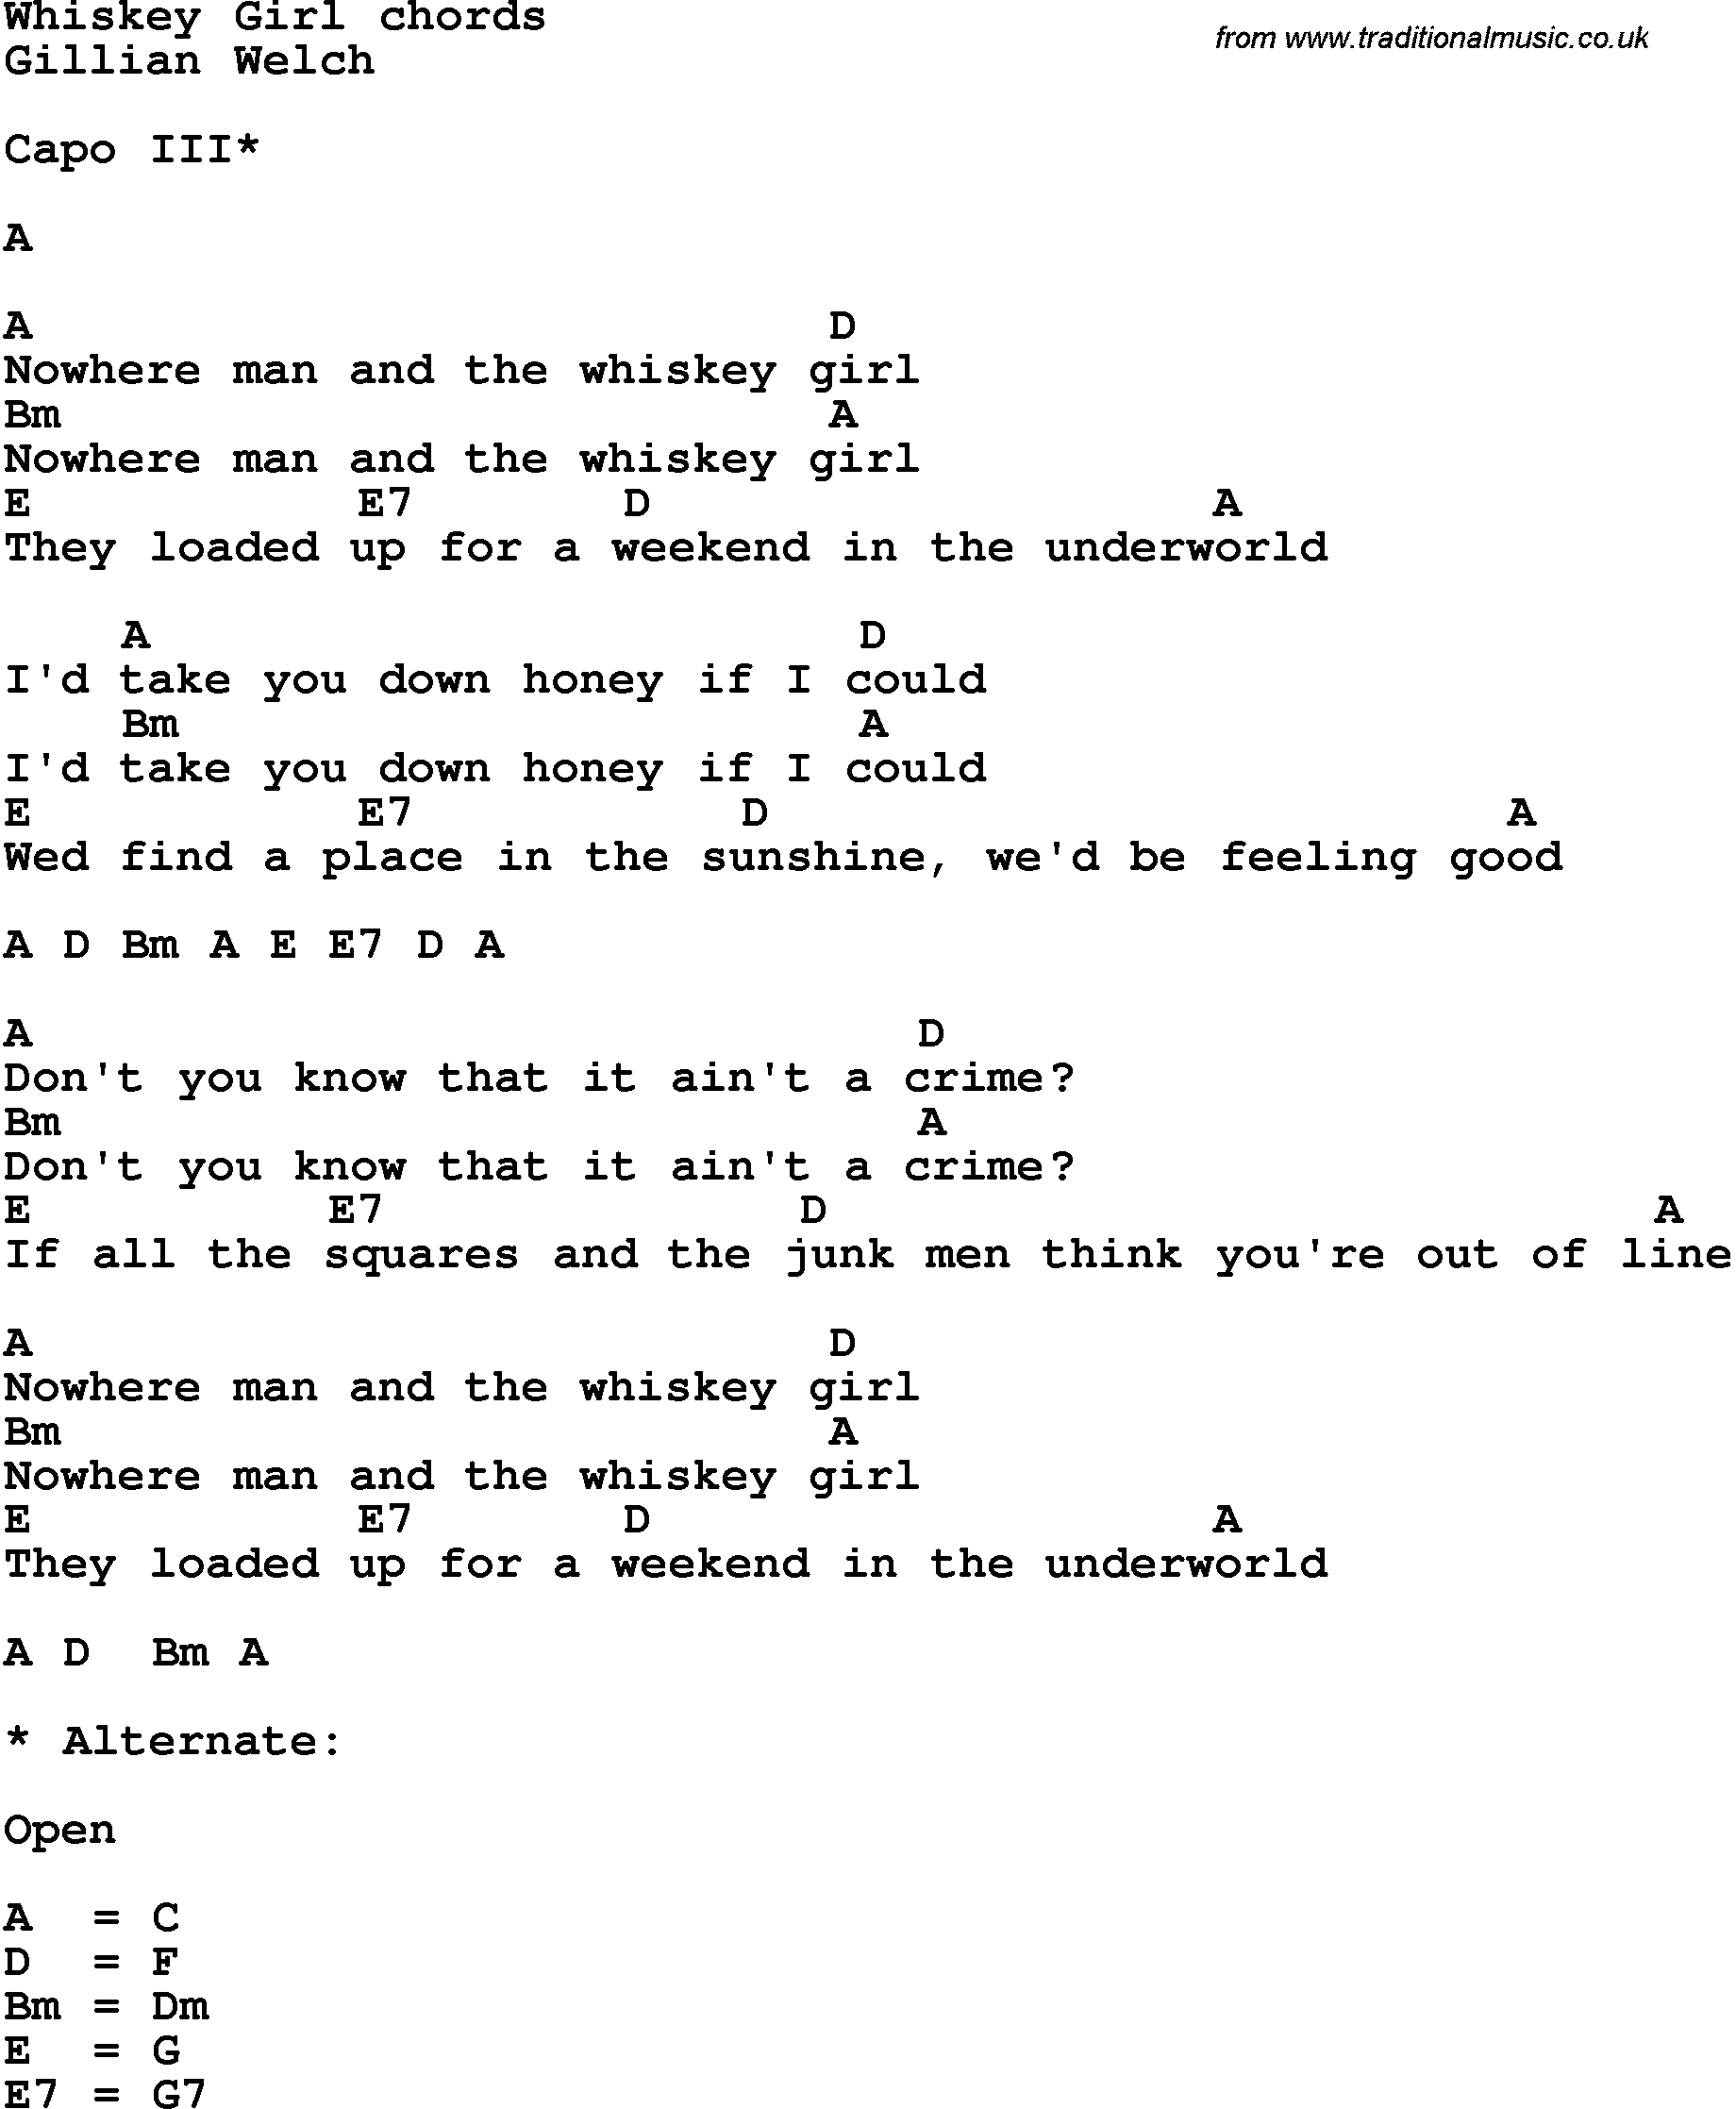 Song Lyrics with guitar chords for Whiskey Girl